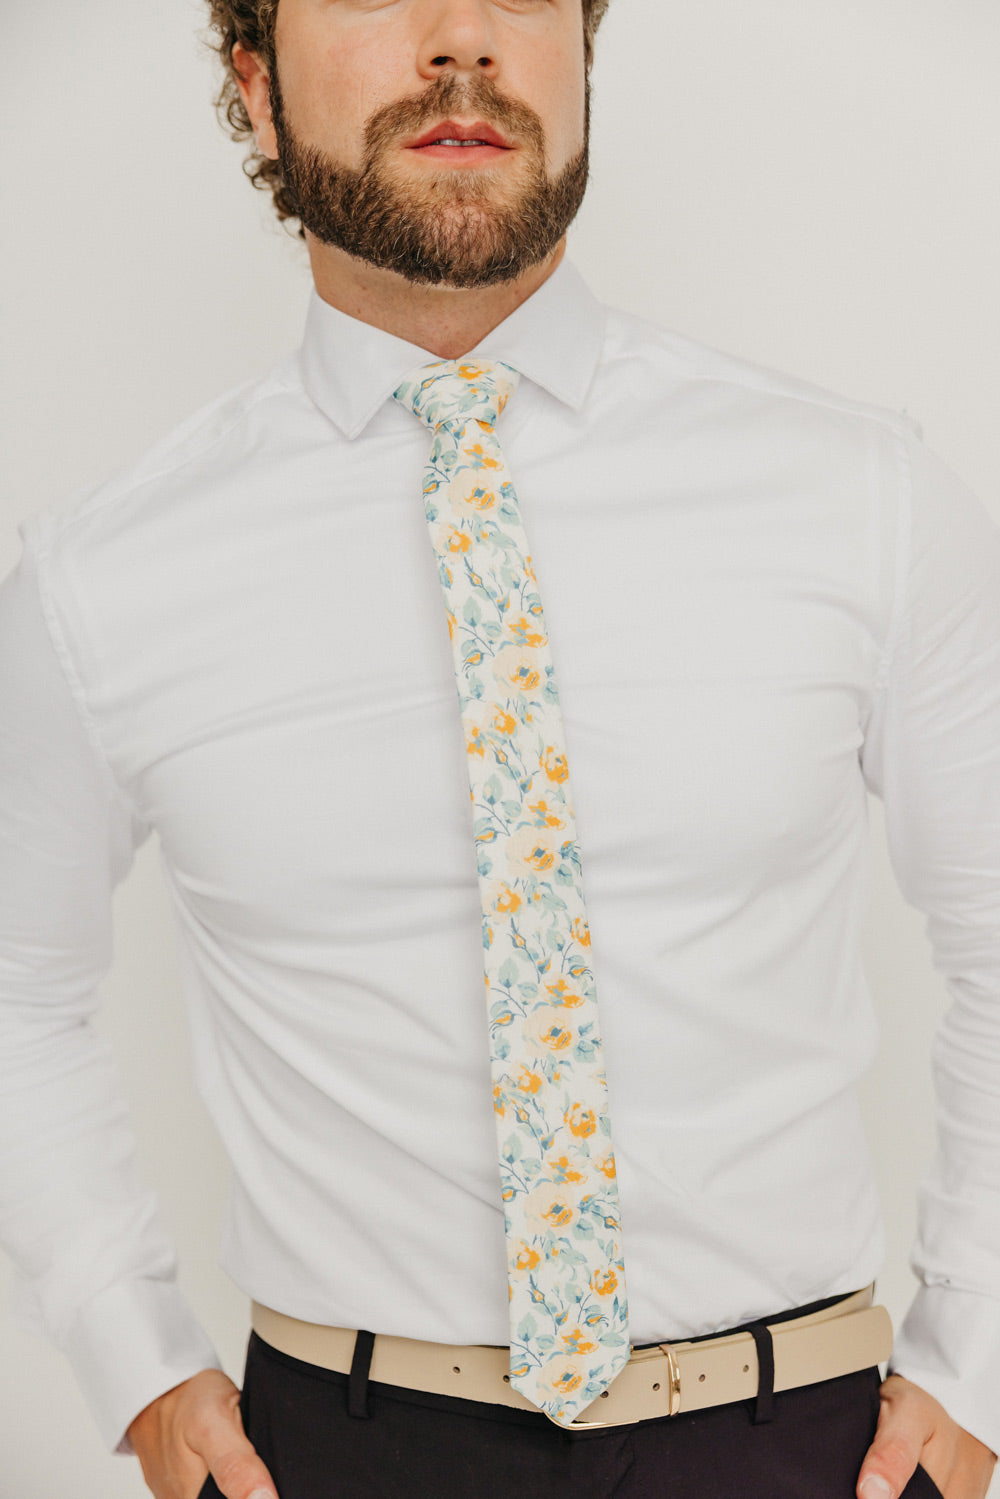 Butterscotch 2.5" Wide Skinny Tie worn with a white shirt, tan belt and black suit pants.